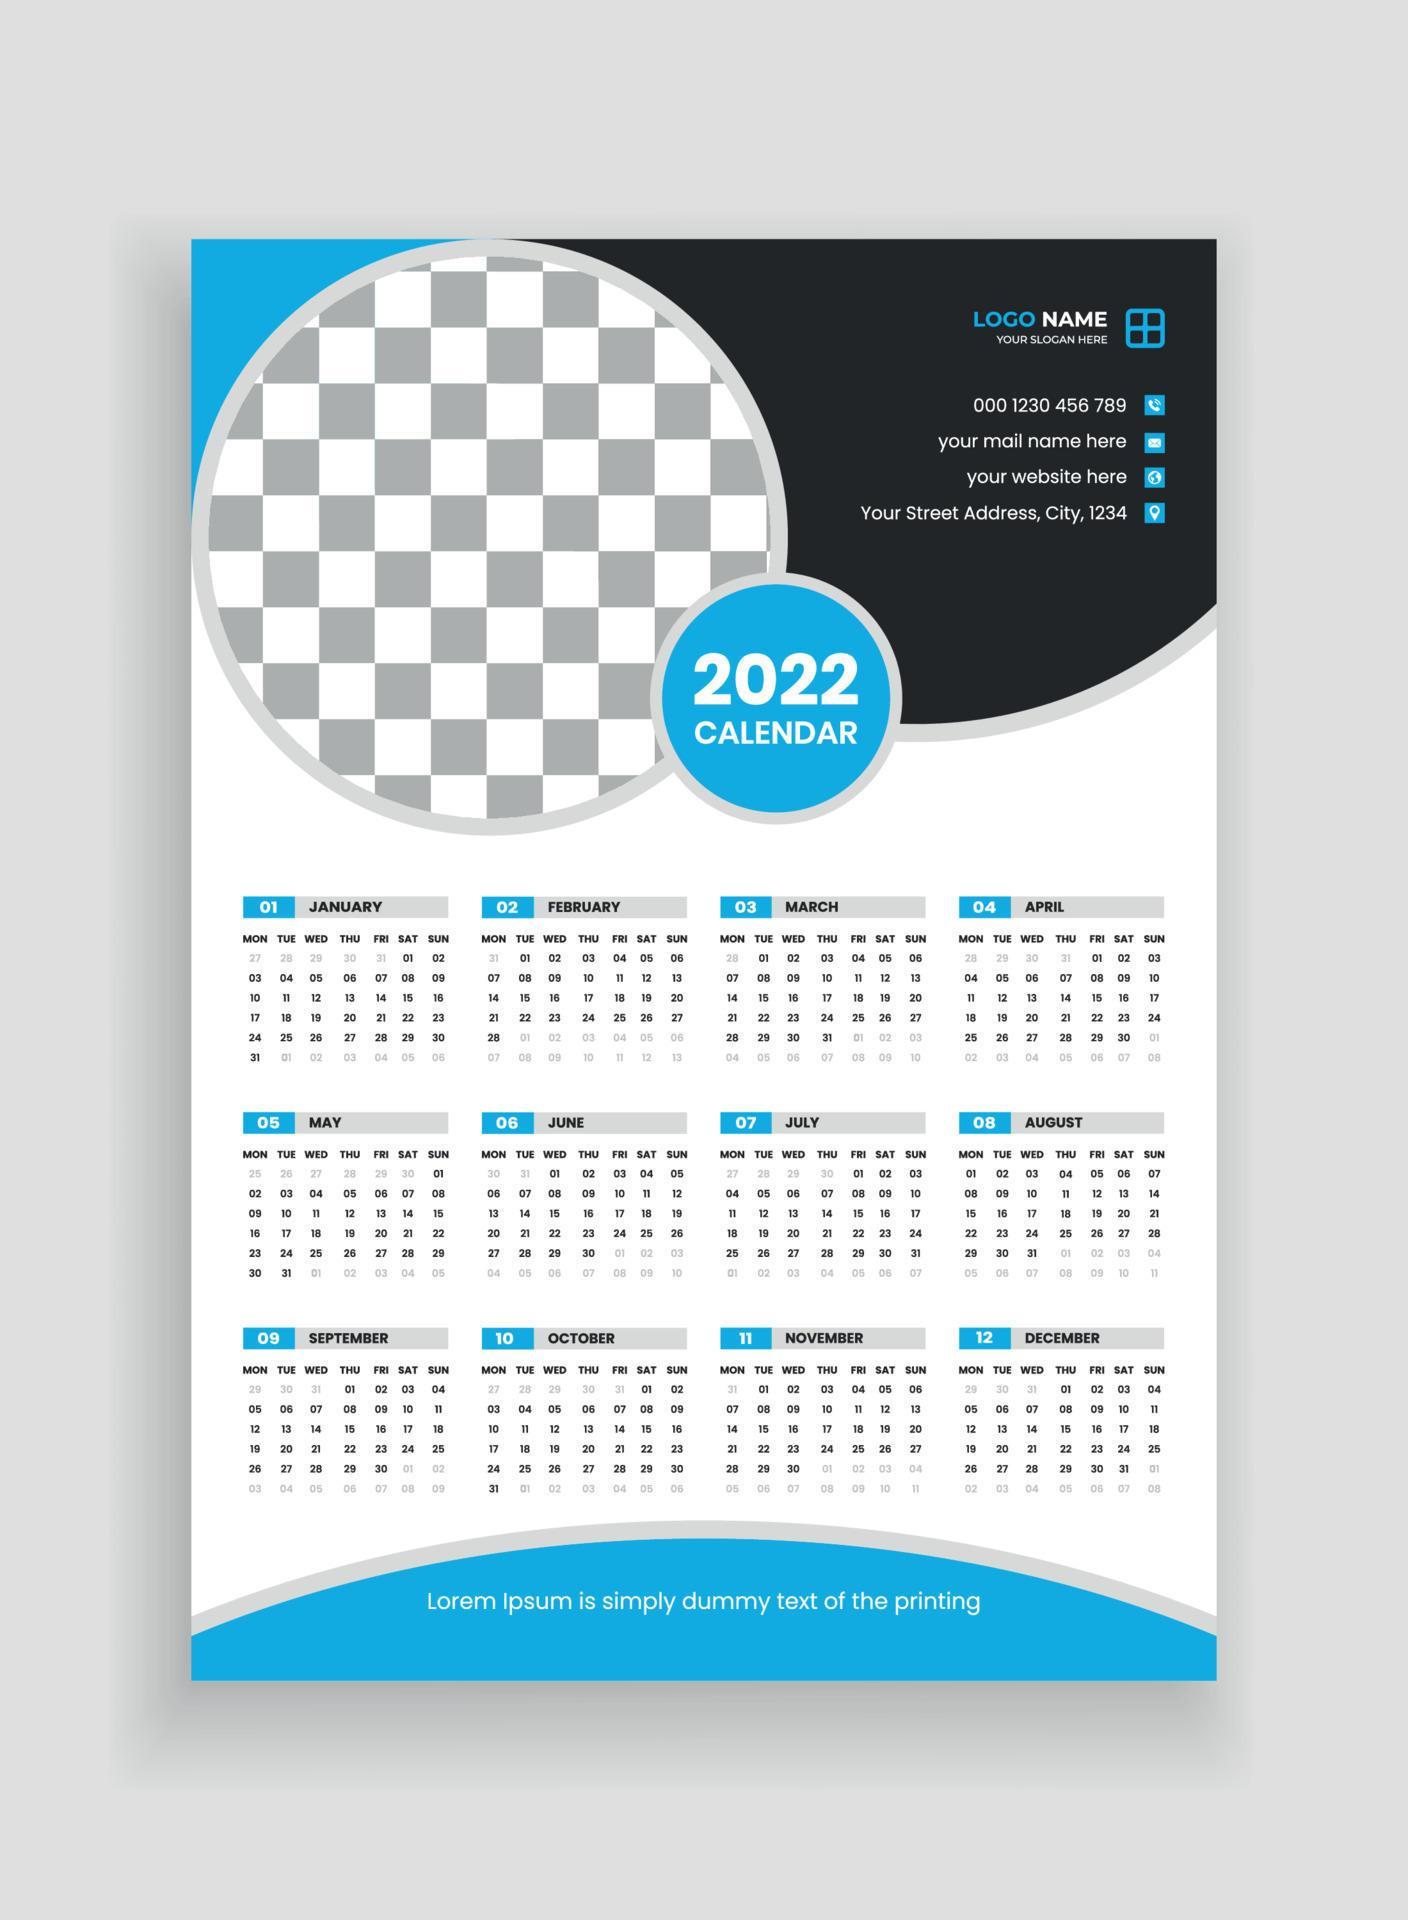 Free Calendar 2022 By Mail One Page Wall Calendar Design 2022. Wall Calendar Design 2022. New Year  Calendar Design 2022. Week Starts On Monday. Template For Annual Calendar  2022 3528115 Vector Art At Vecteezy